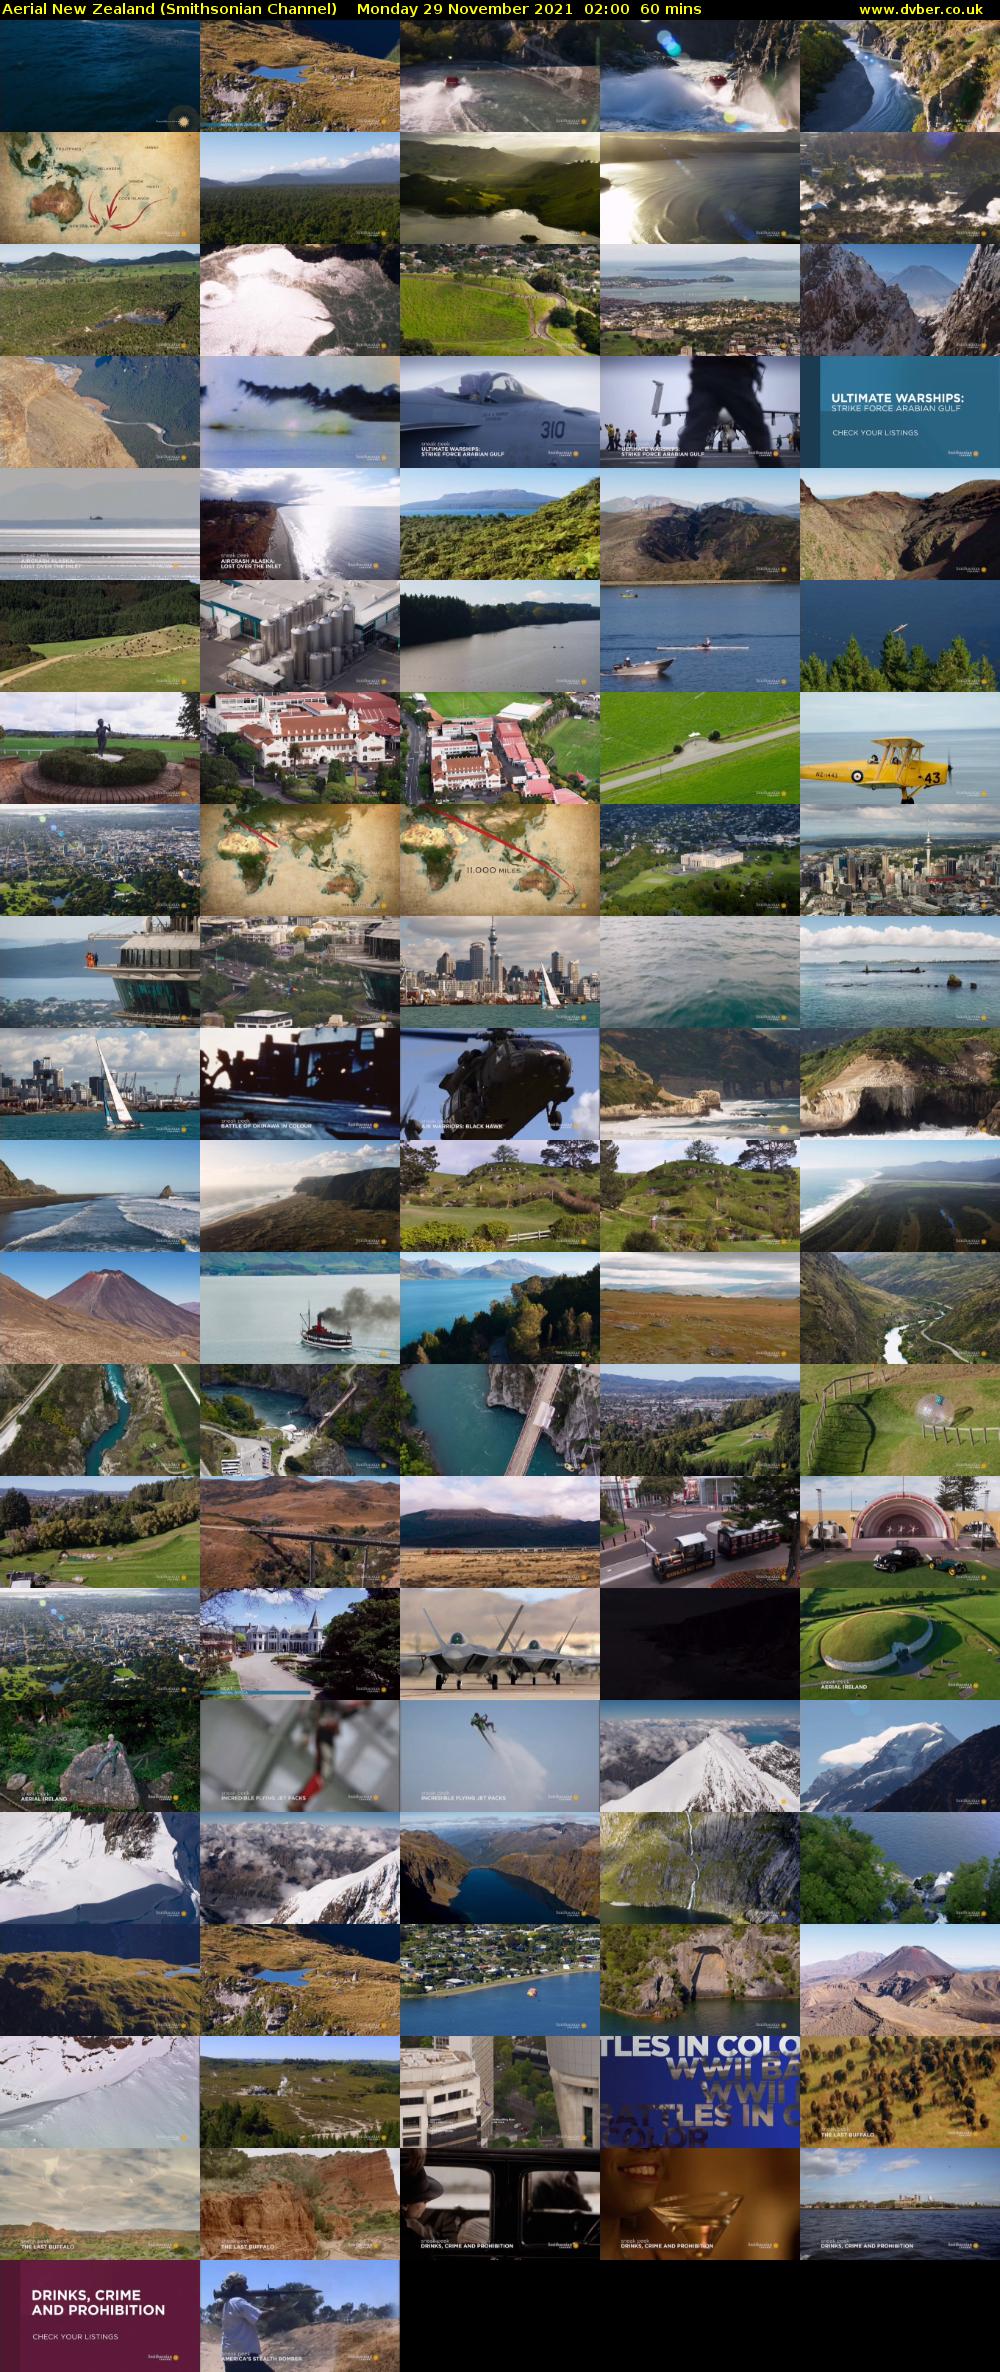 Aerial New Zealand (Smithsonian Channel) Monday 29 November 2021 02:00 - 03:00